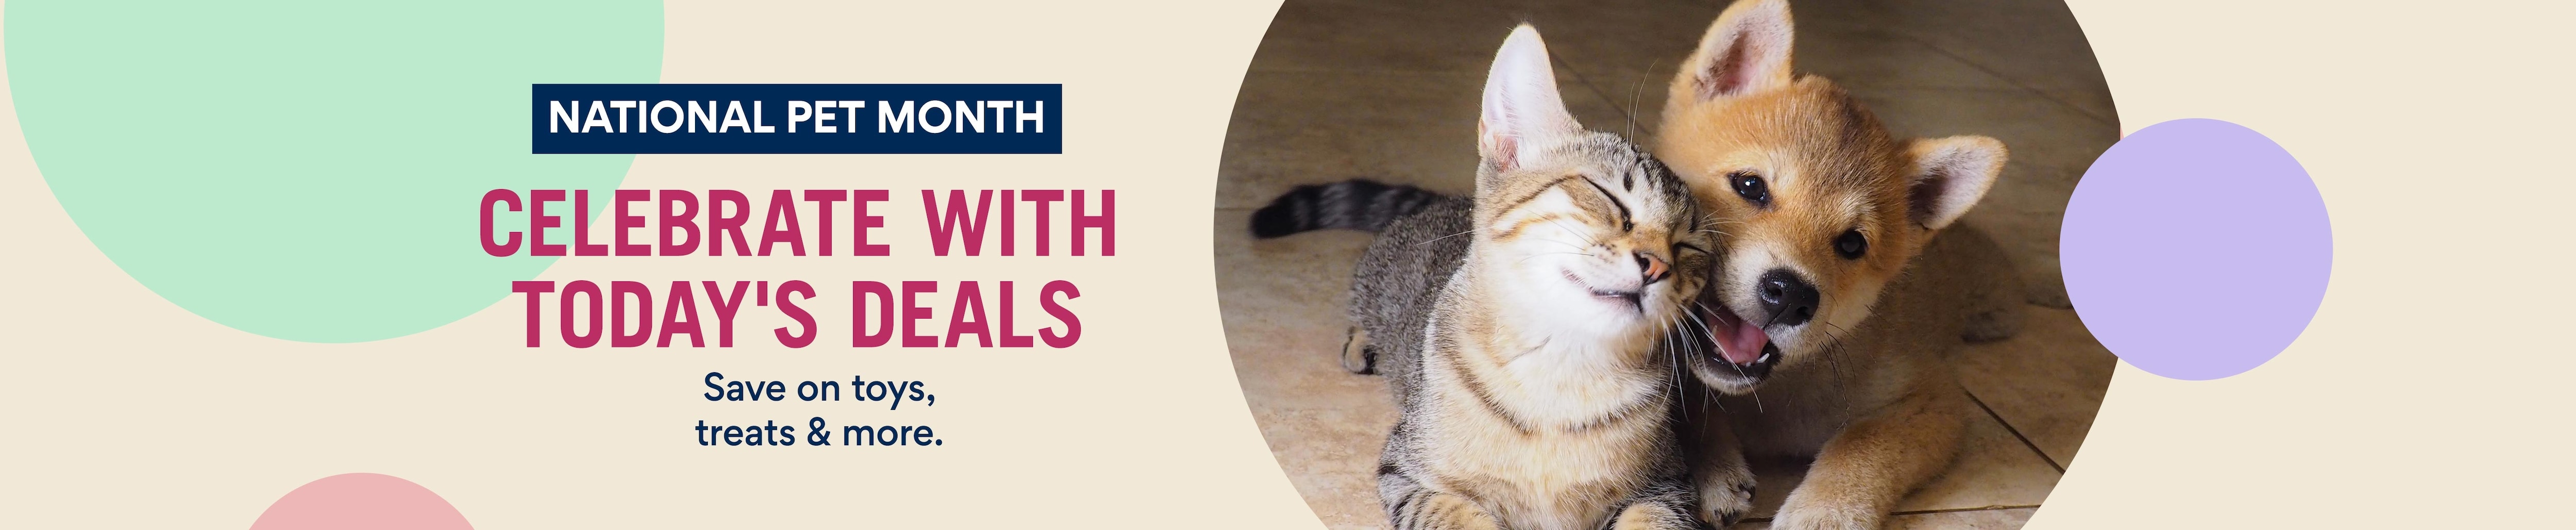 National Pet Month. Celebrate With Today's Deals. Save on toys, treats & more.